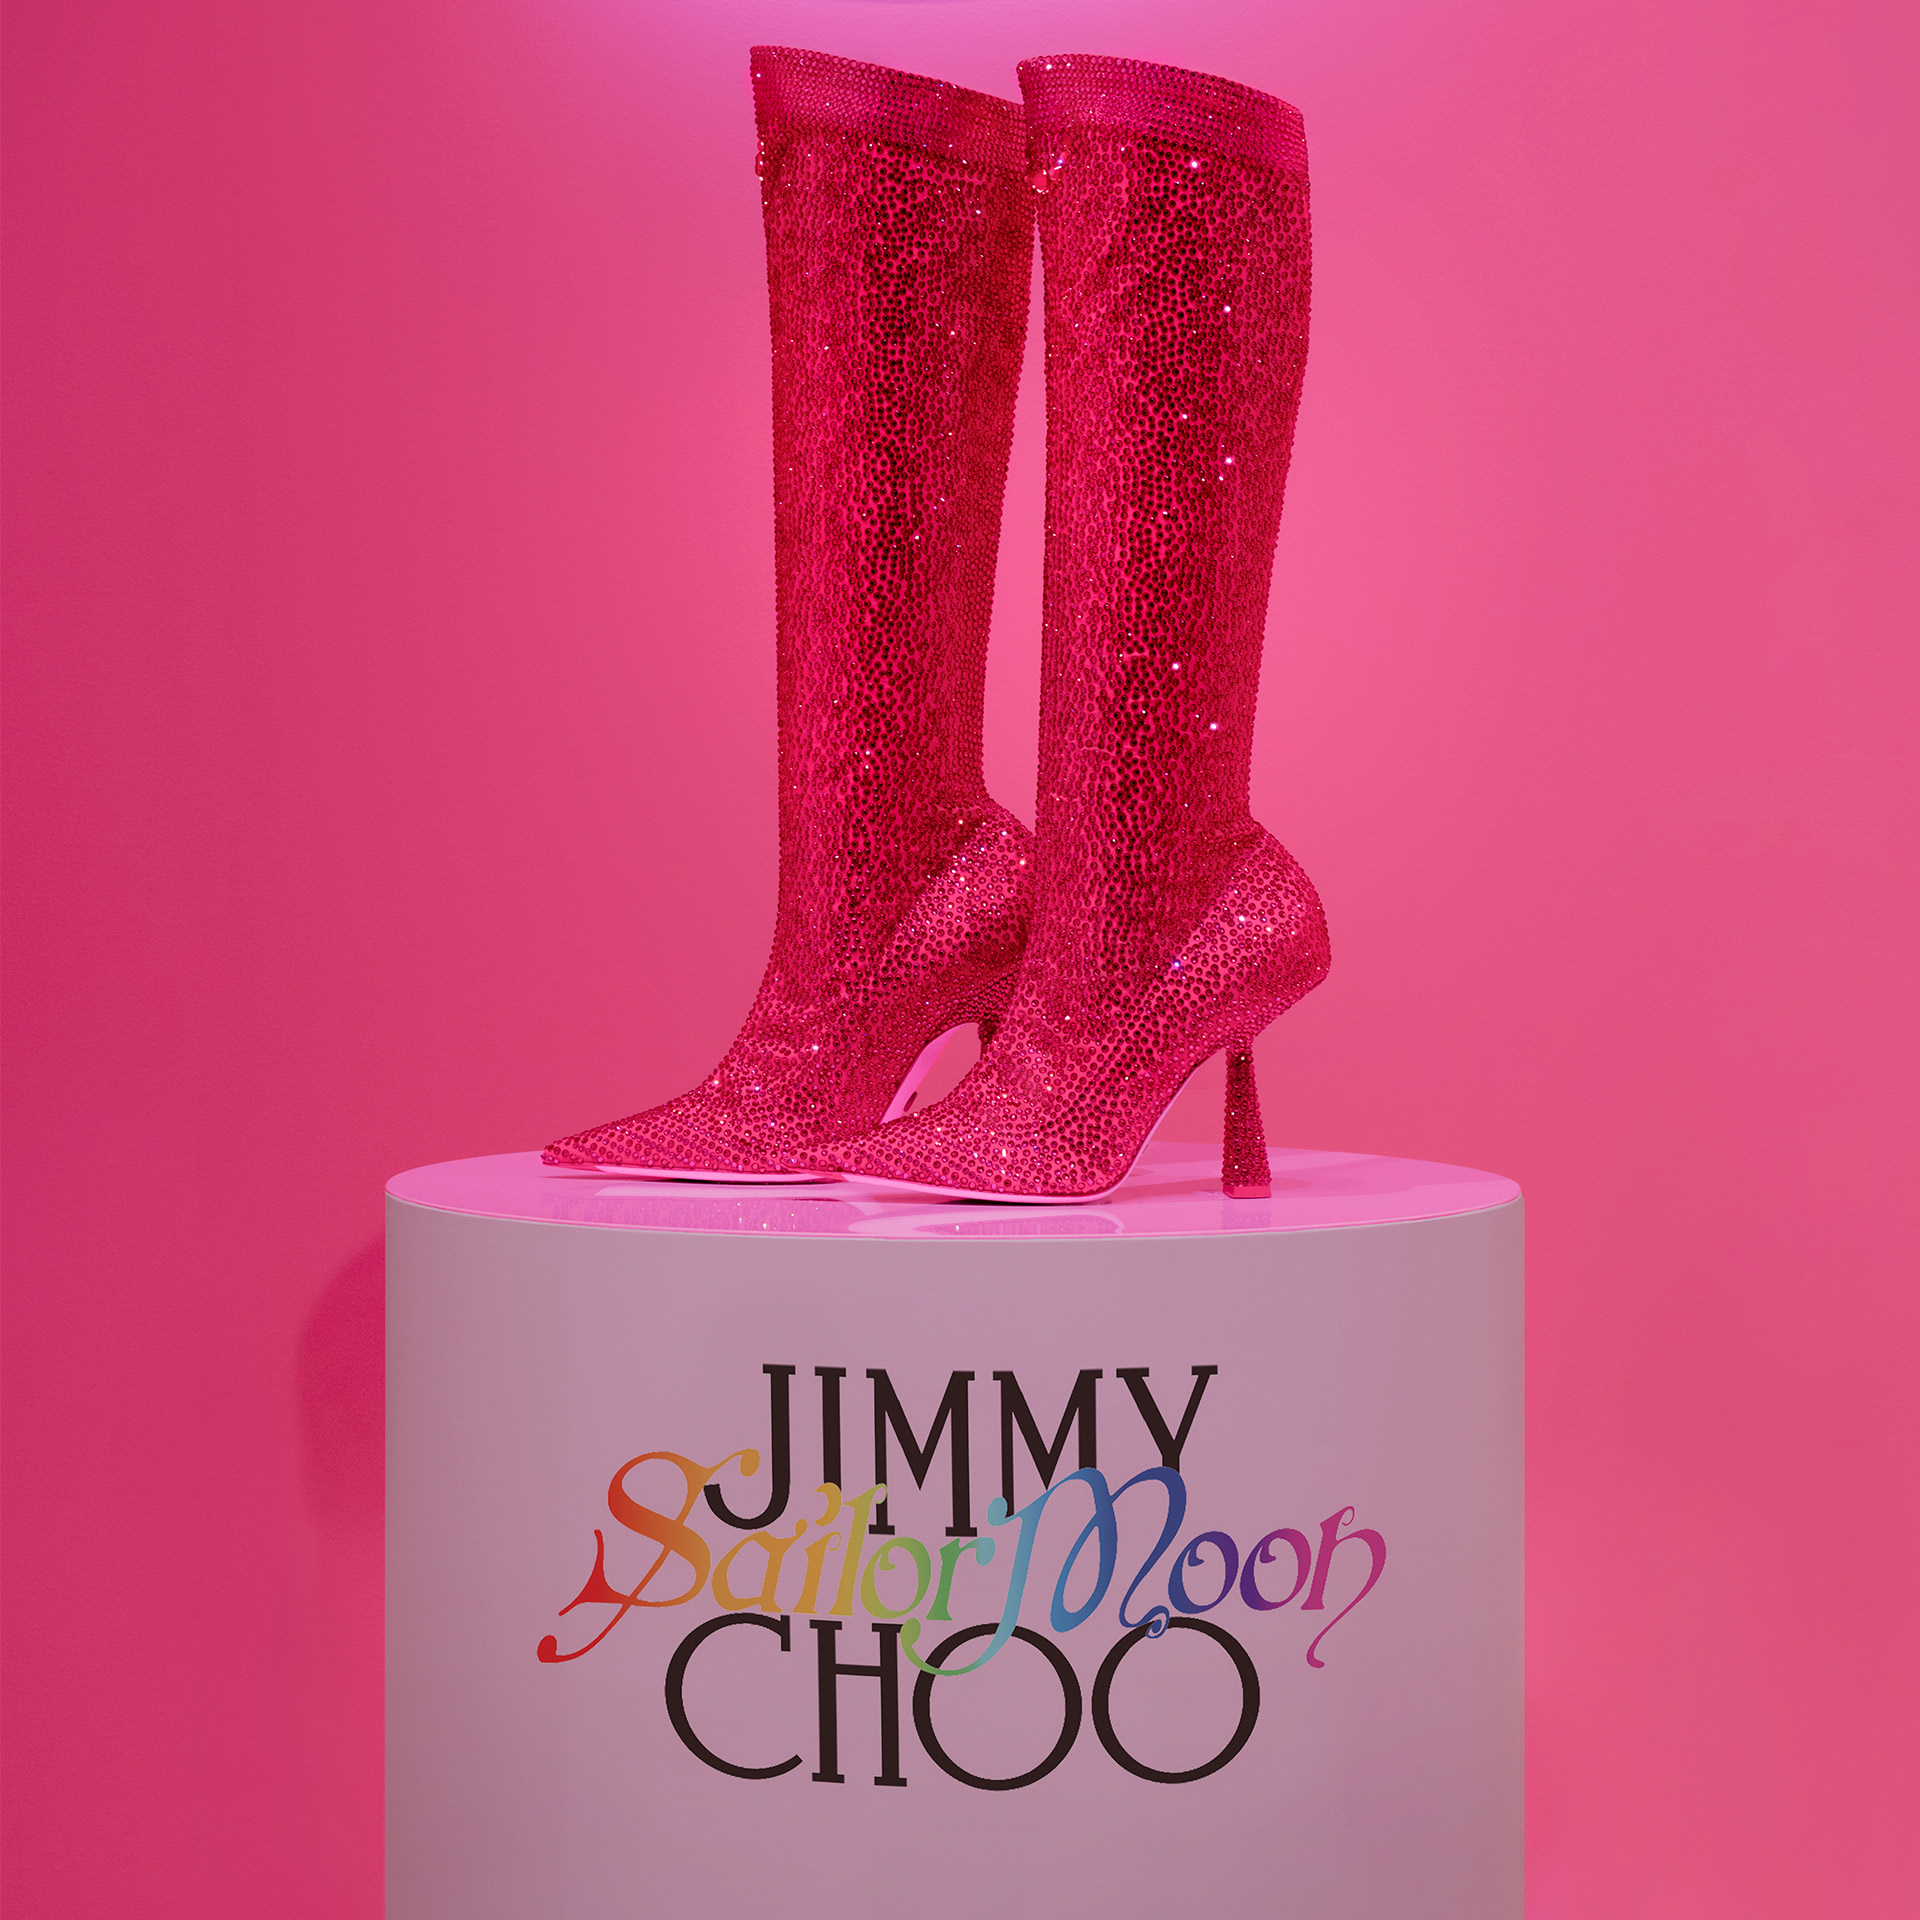 Jimmy Choo X Sailor Moon? The BEST Collaboration of 2023! 